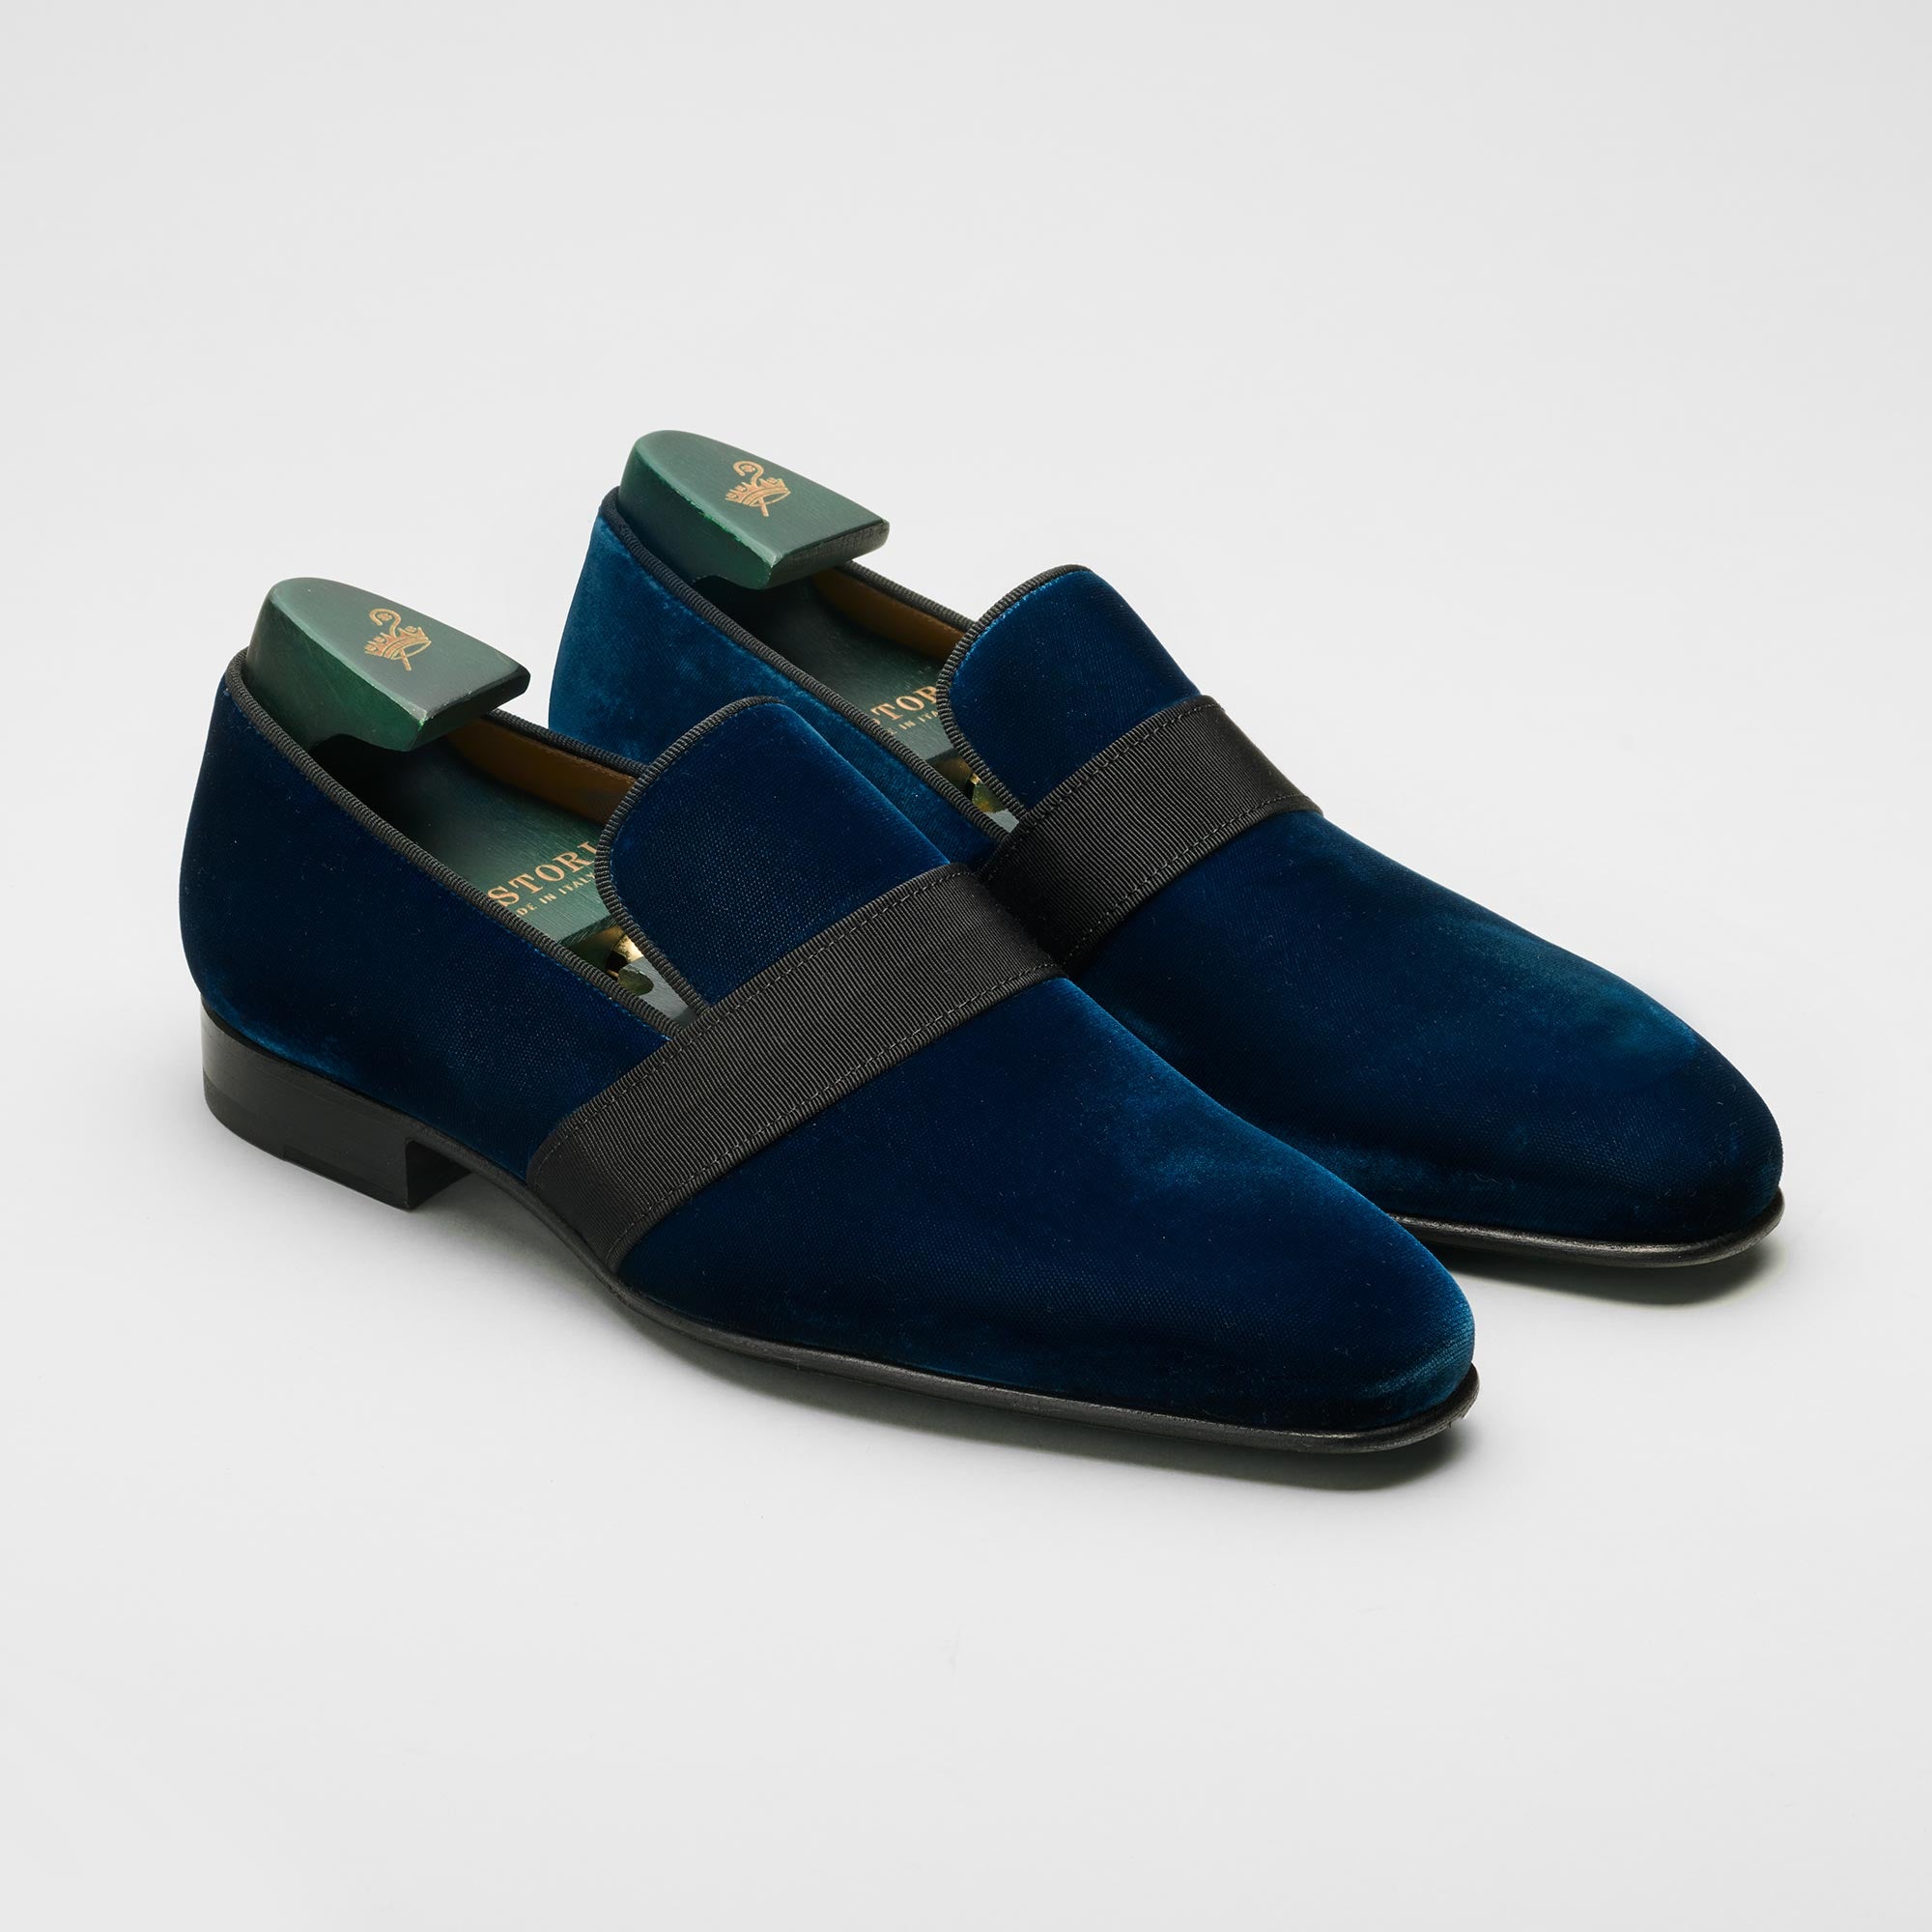 men's suede blue loafer, formal, made in italy, handmade